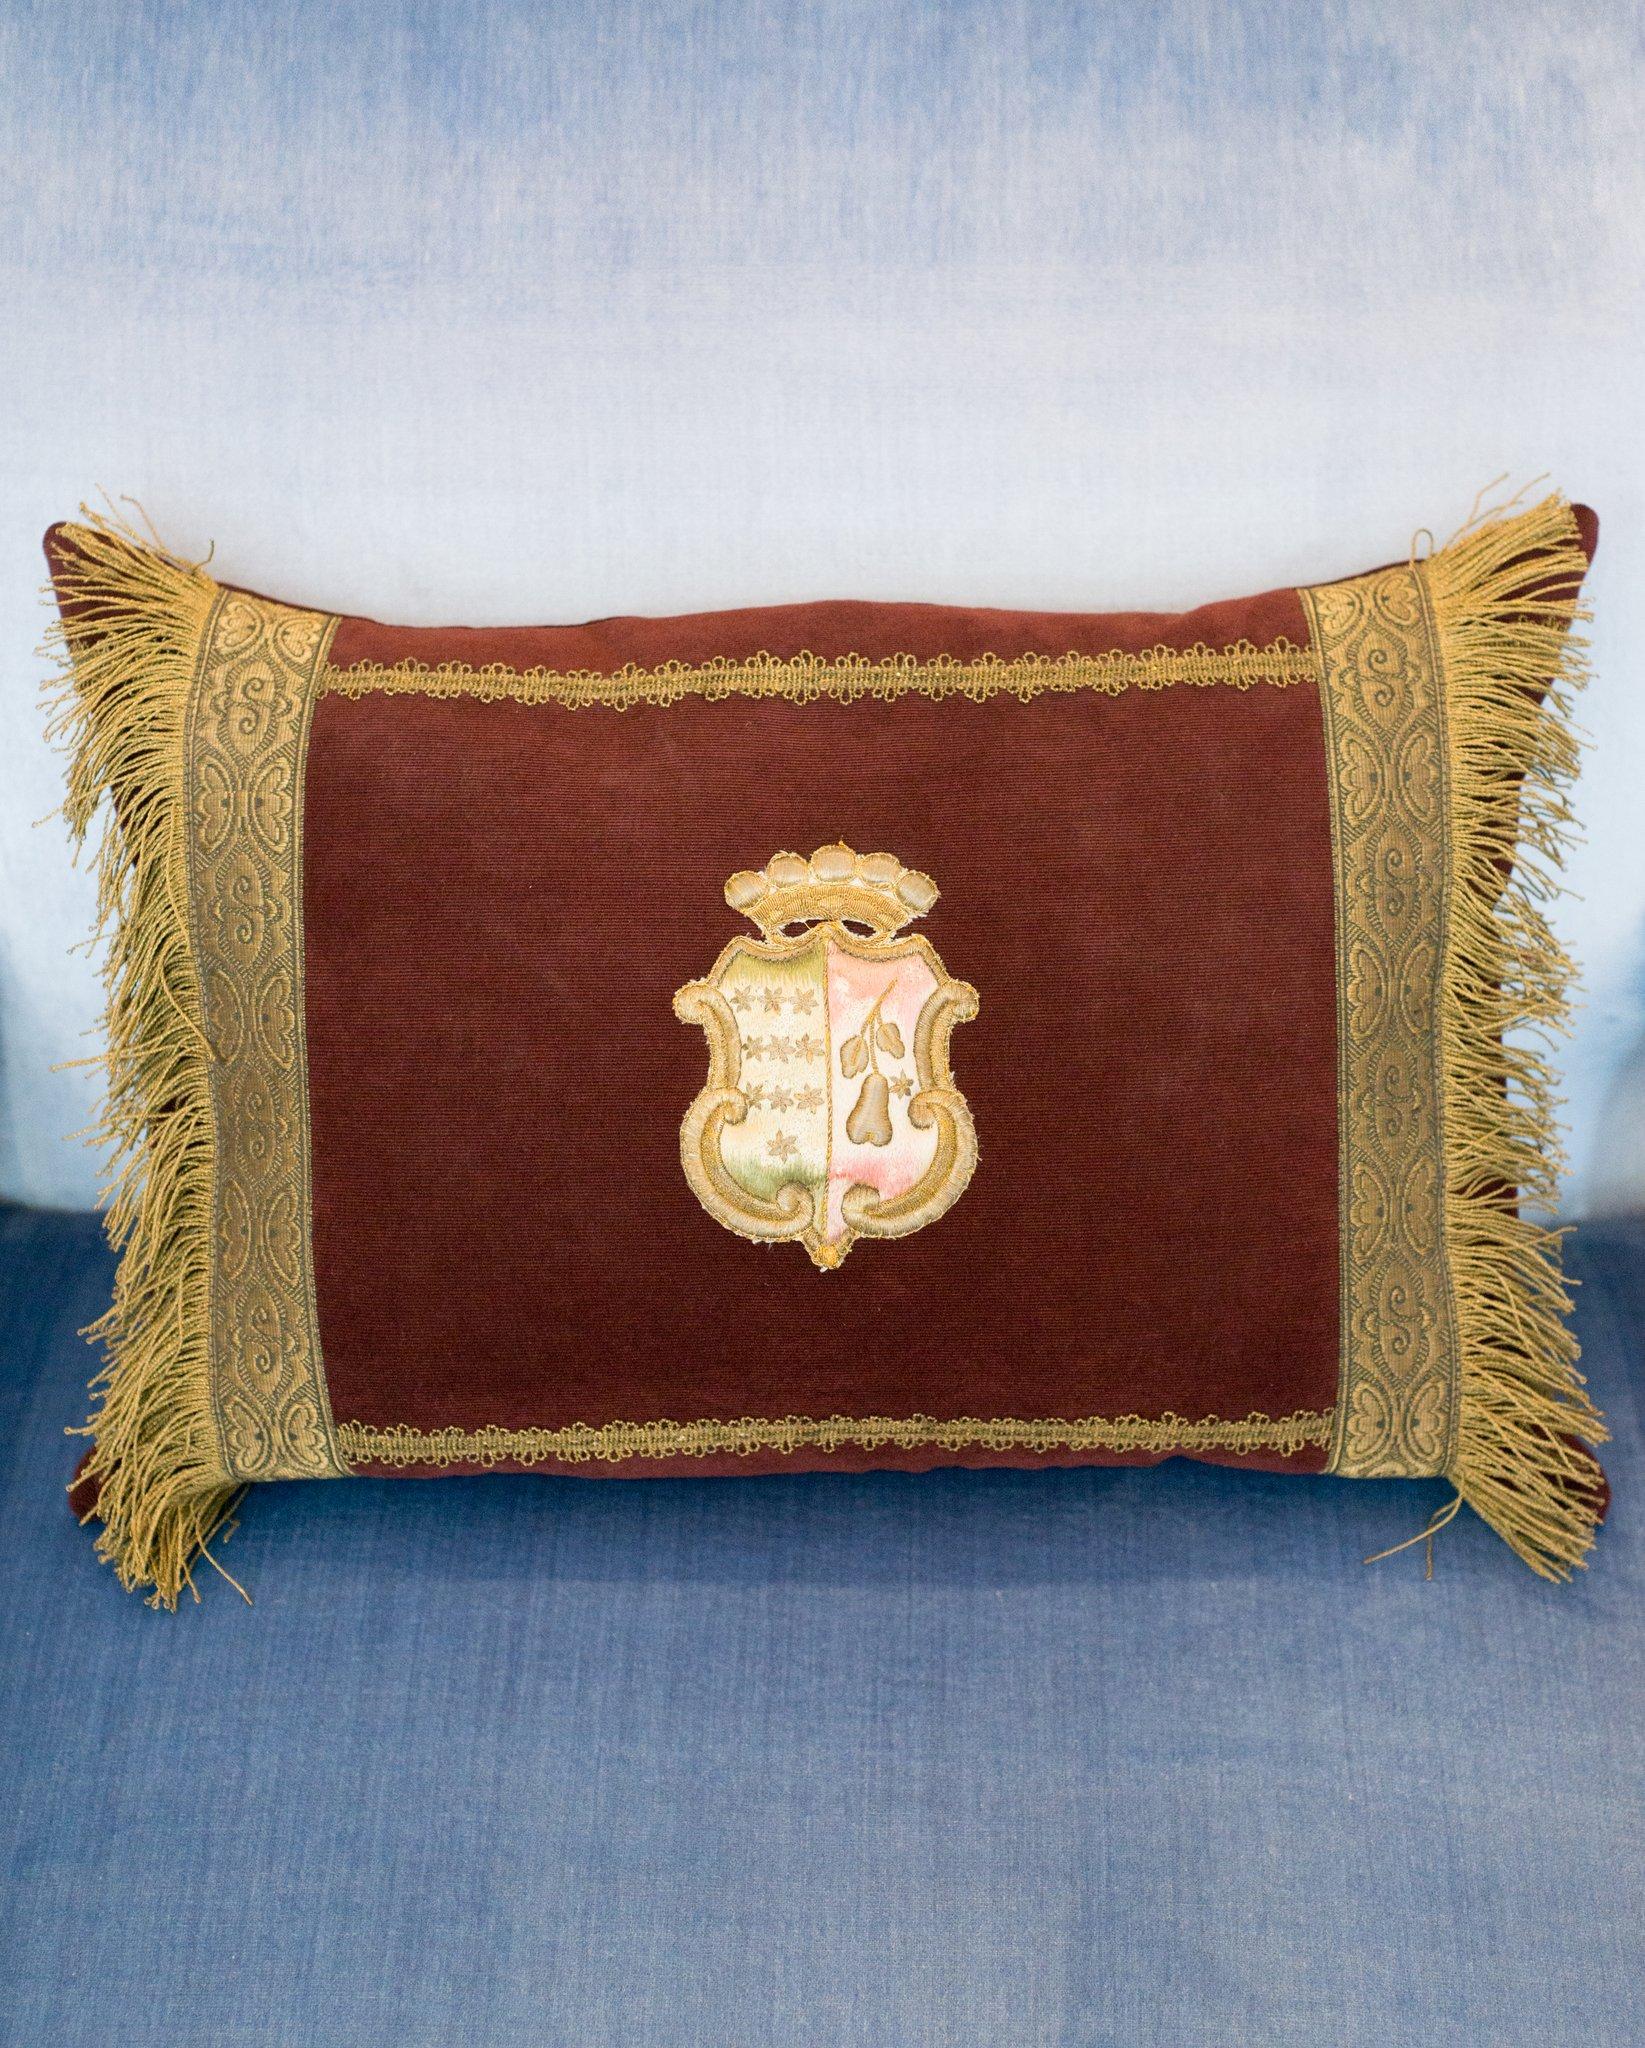 Burgundy Velvet Pillow with Antique Metallic Trim & Tassels In New Condition For Sale In Toronto, ON